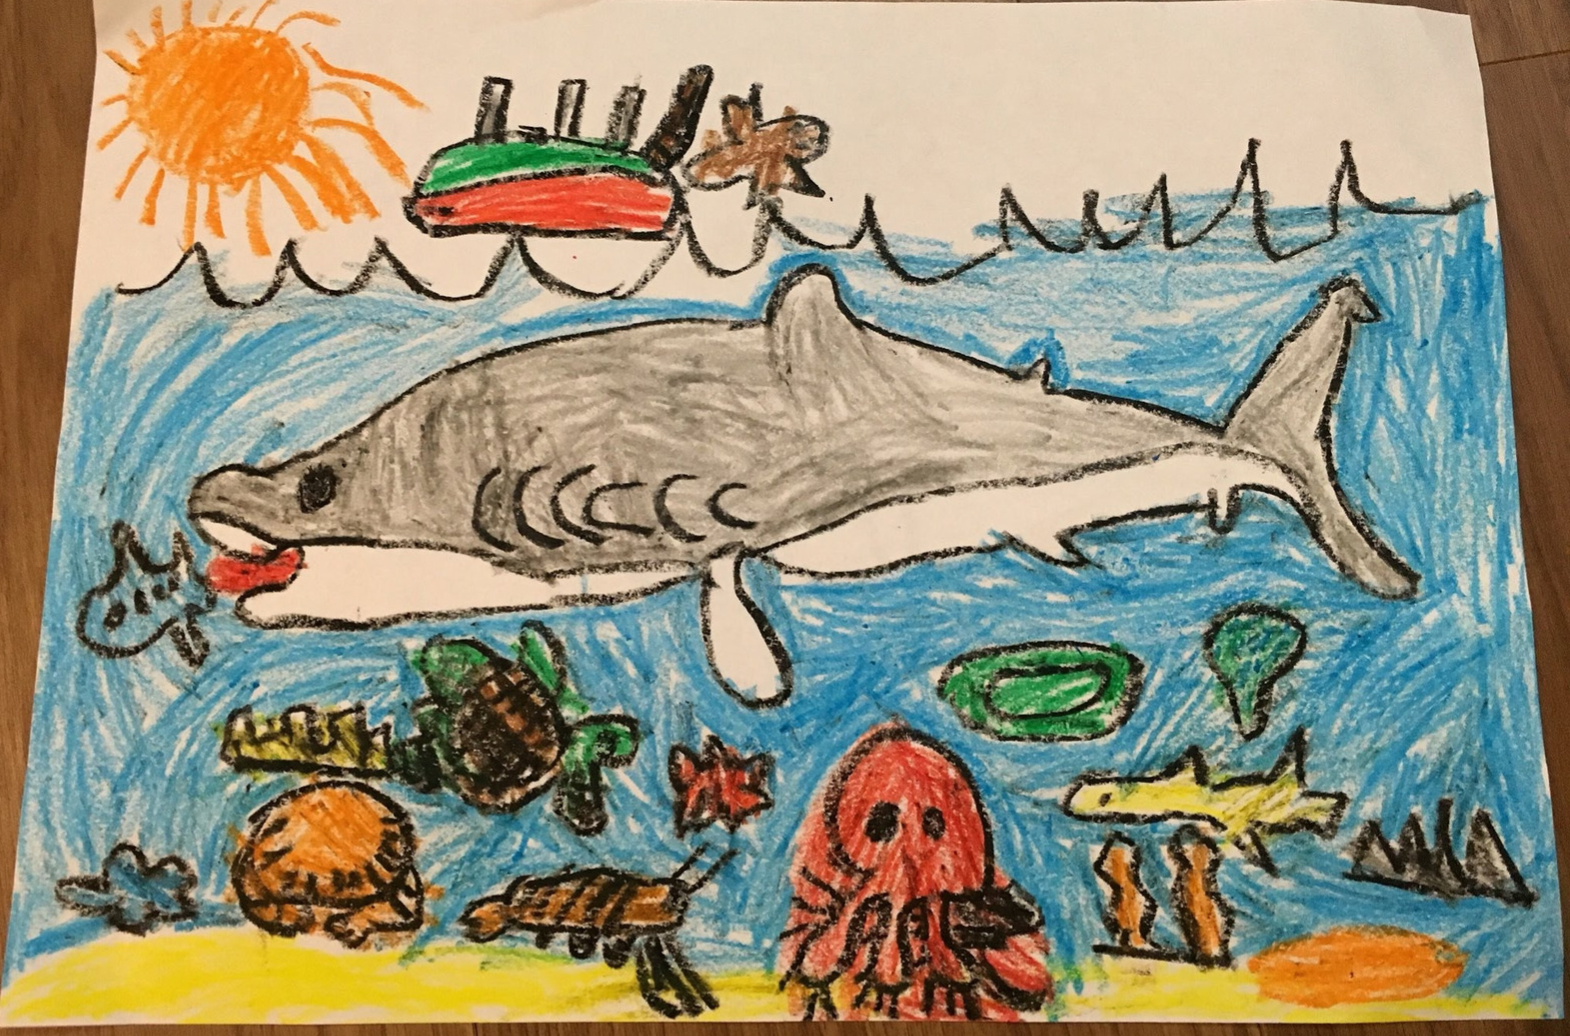 son's drawing of ocean animals